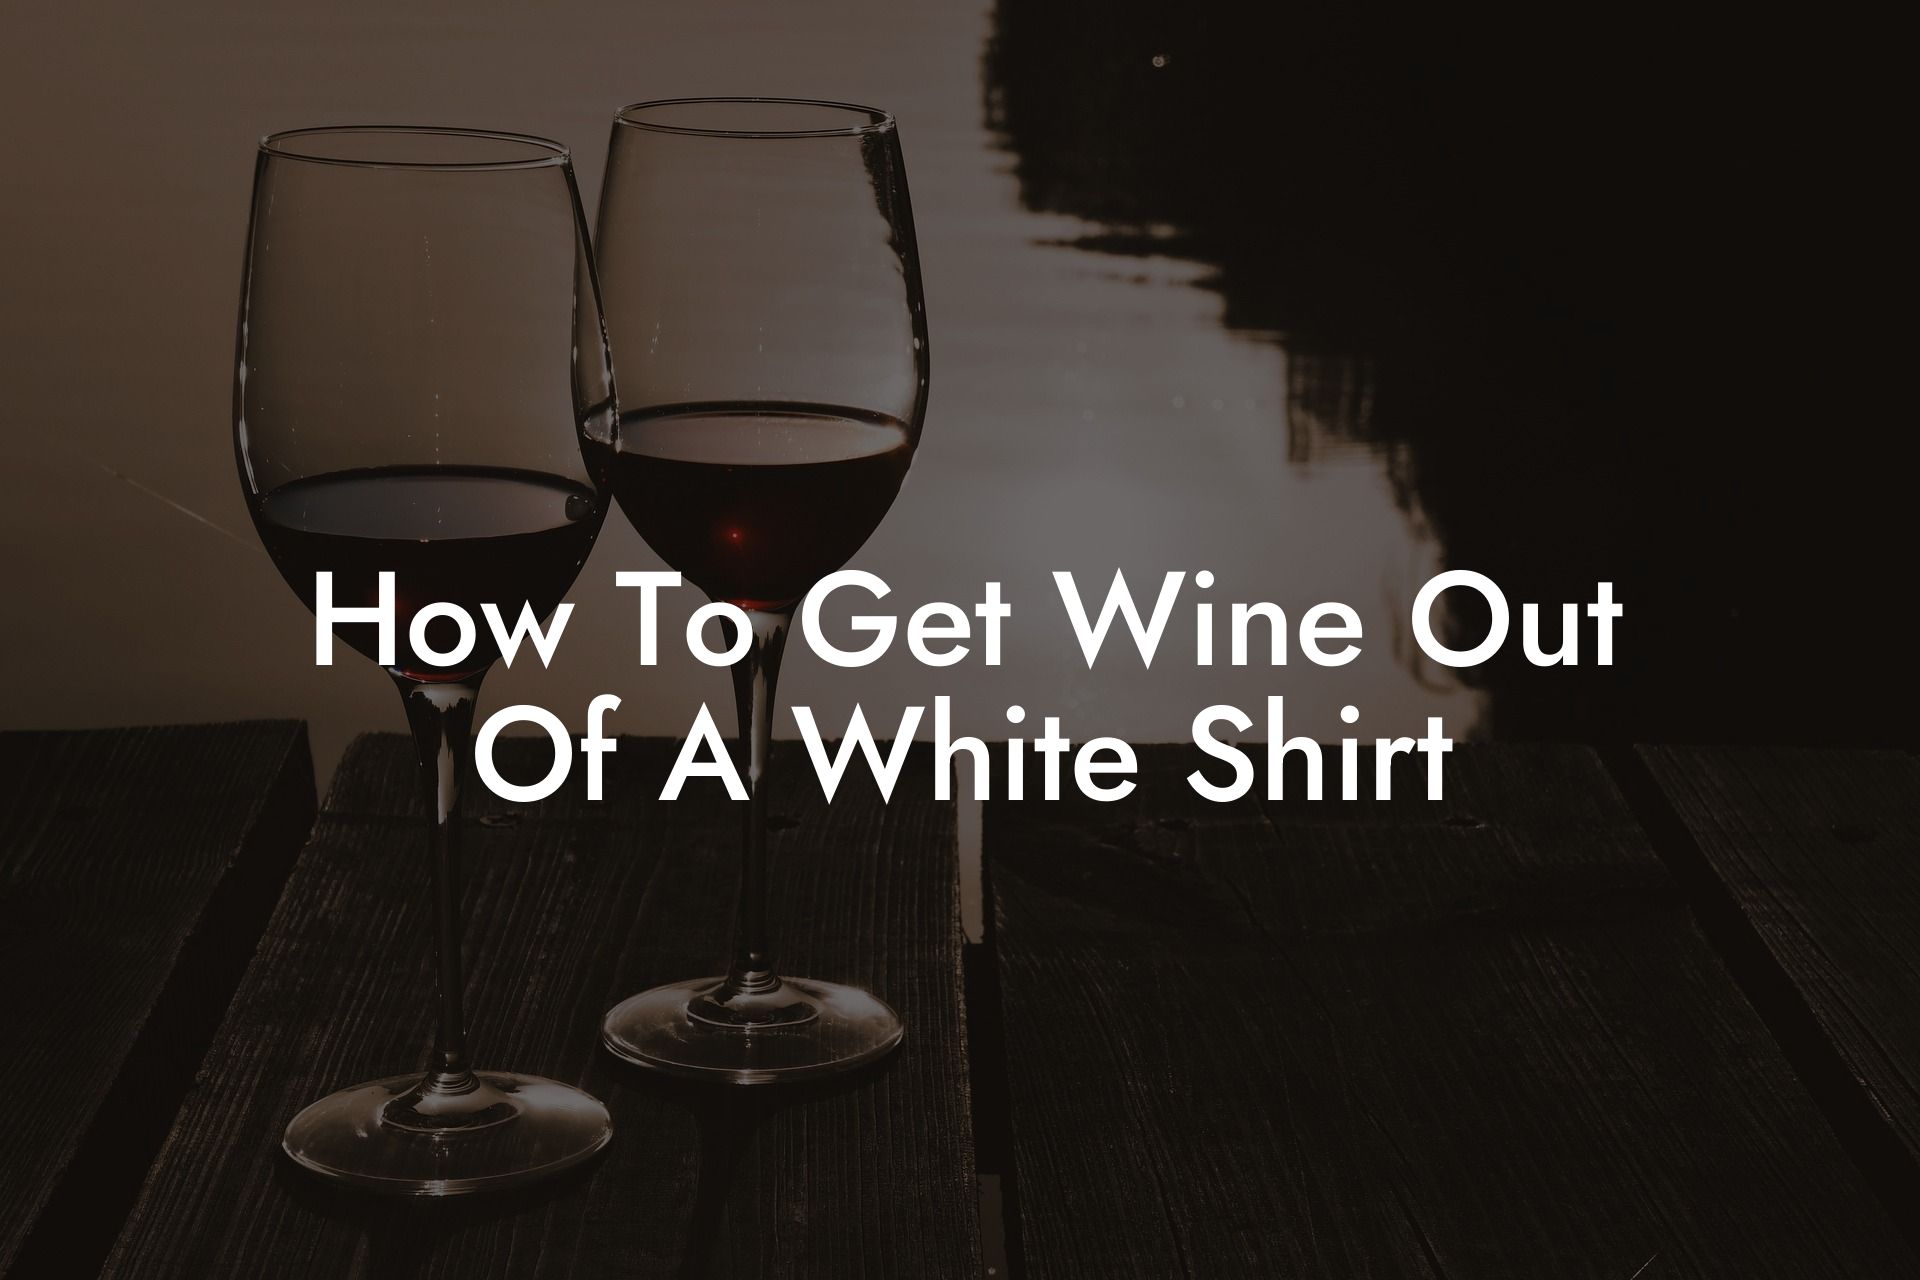 How To Get Wine Out Of A White Shirt